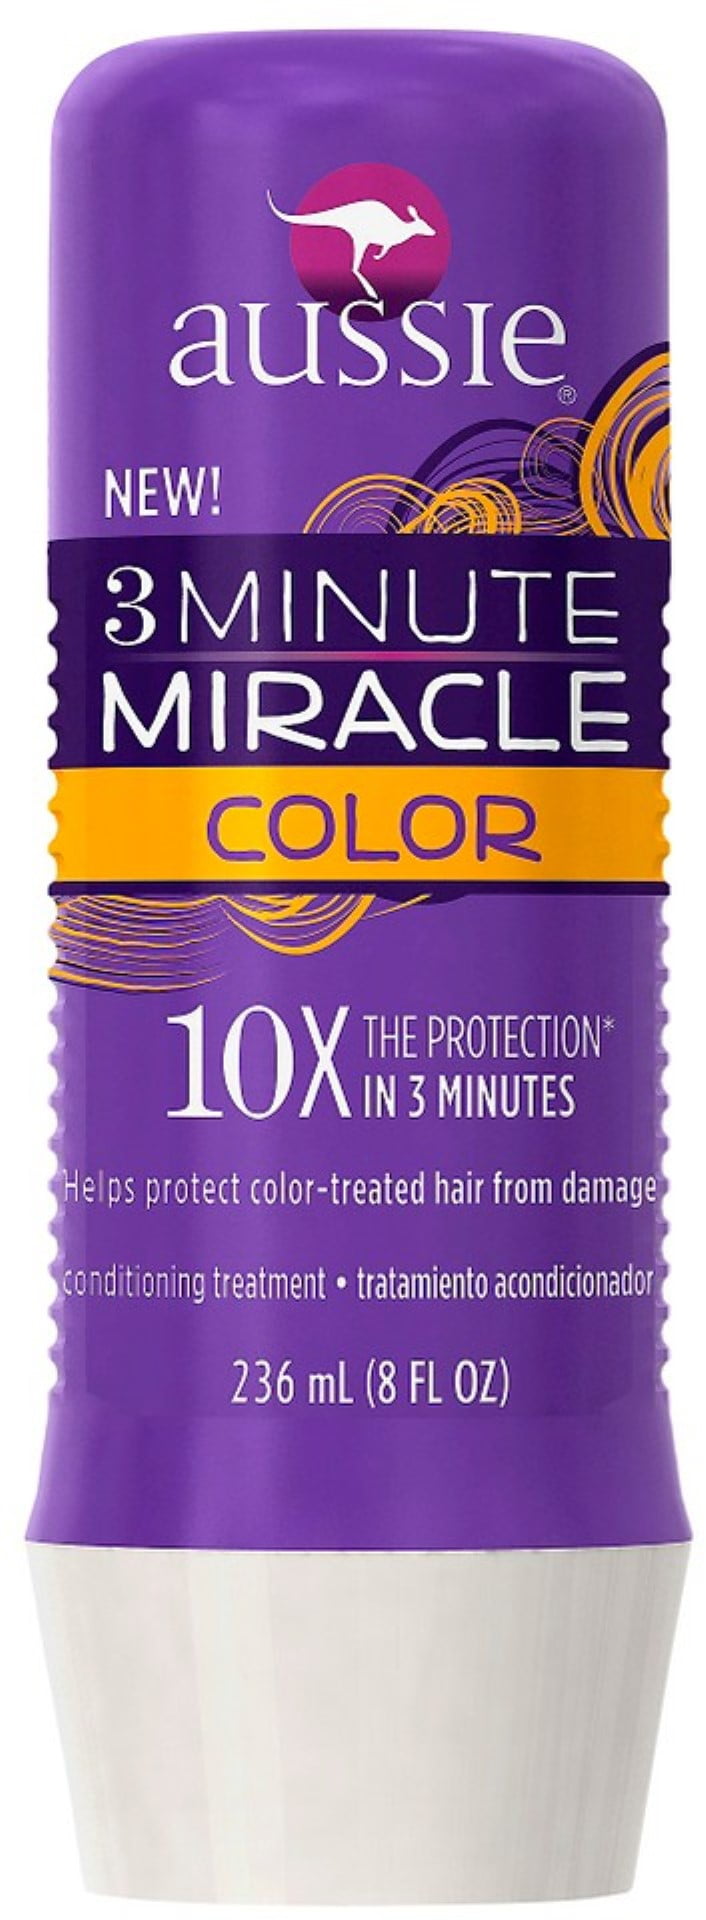 Aussie 3 Minute Miracle Color Conditioning Treatment 8 oz ...